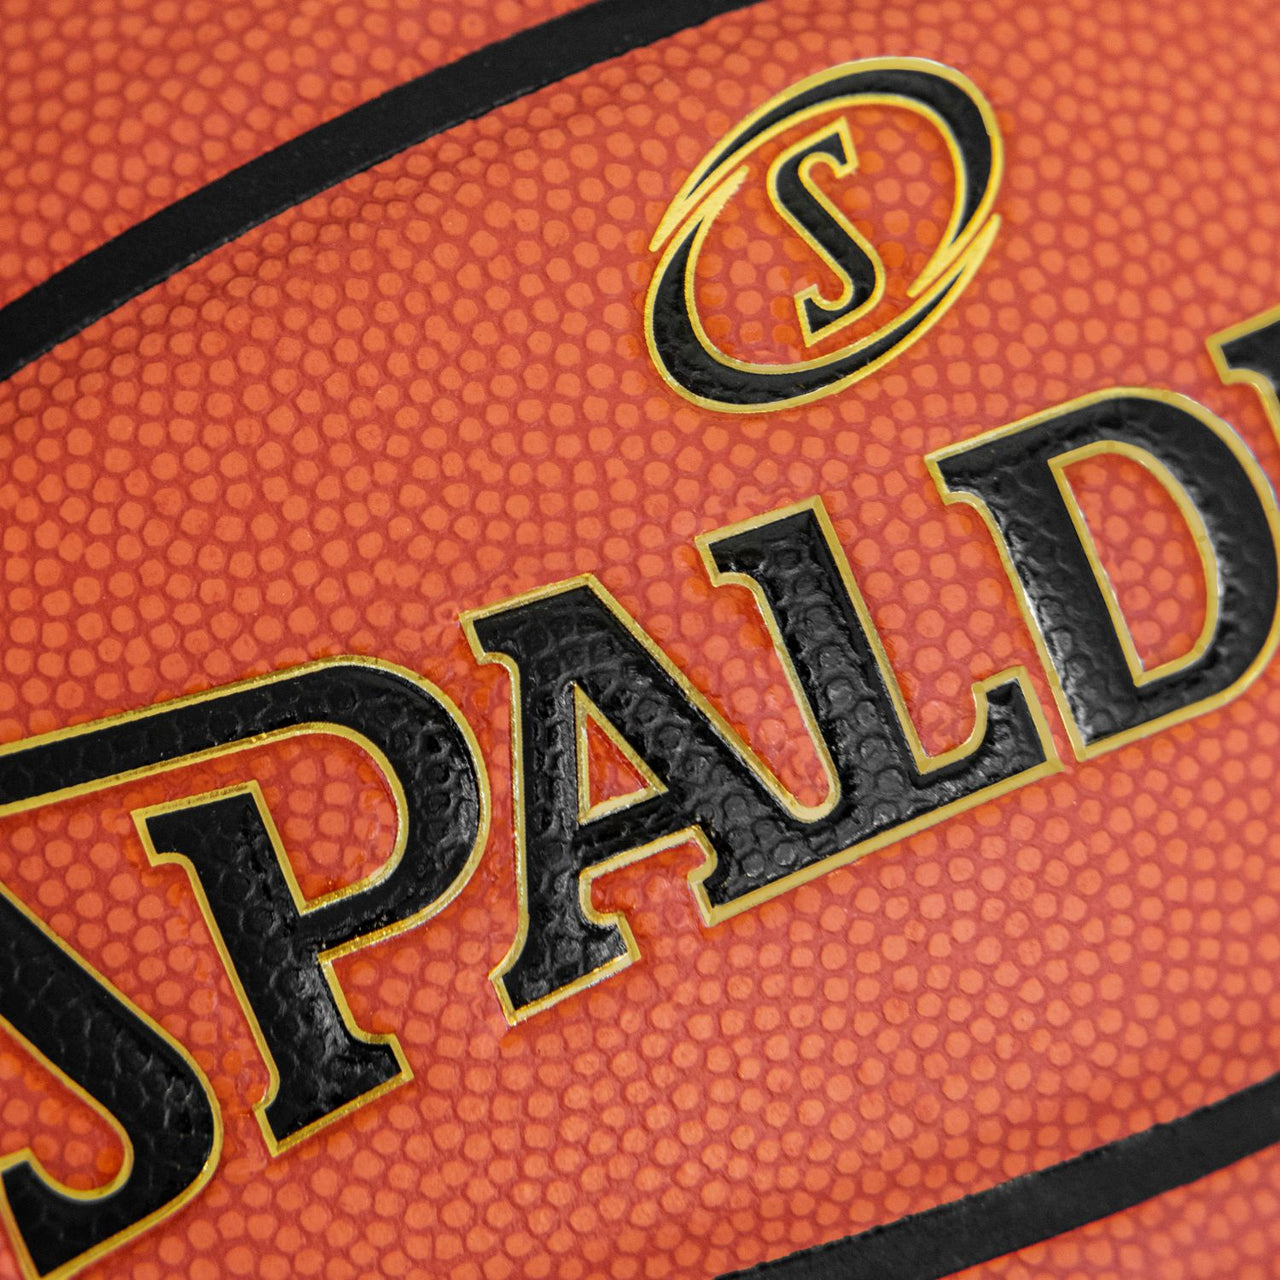 Spalding TF-1000 Legacy Official Basketball